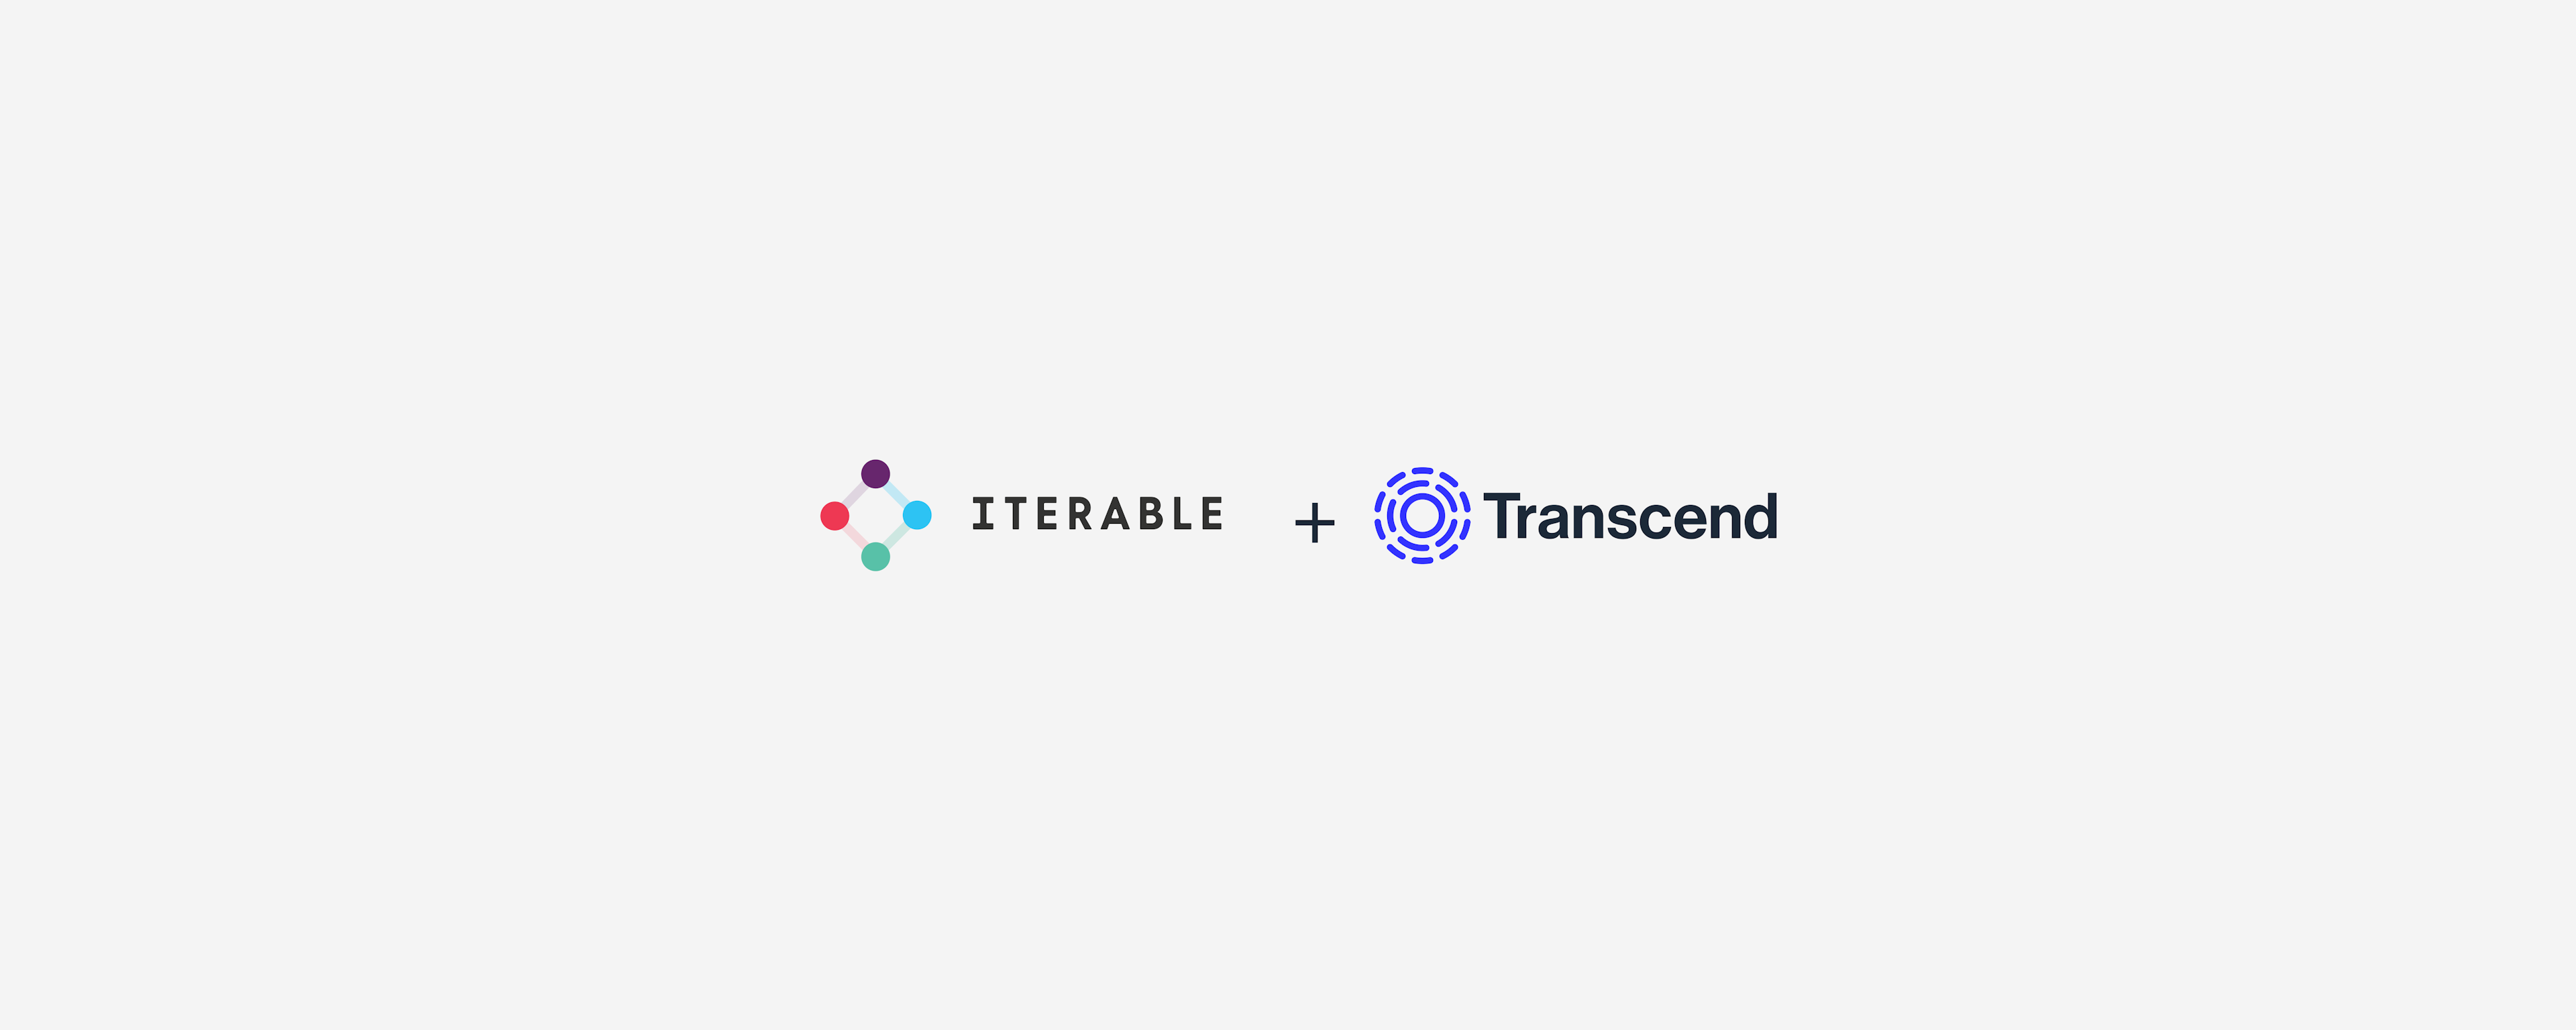 Iterable and Transcend logos